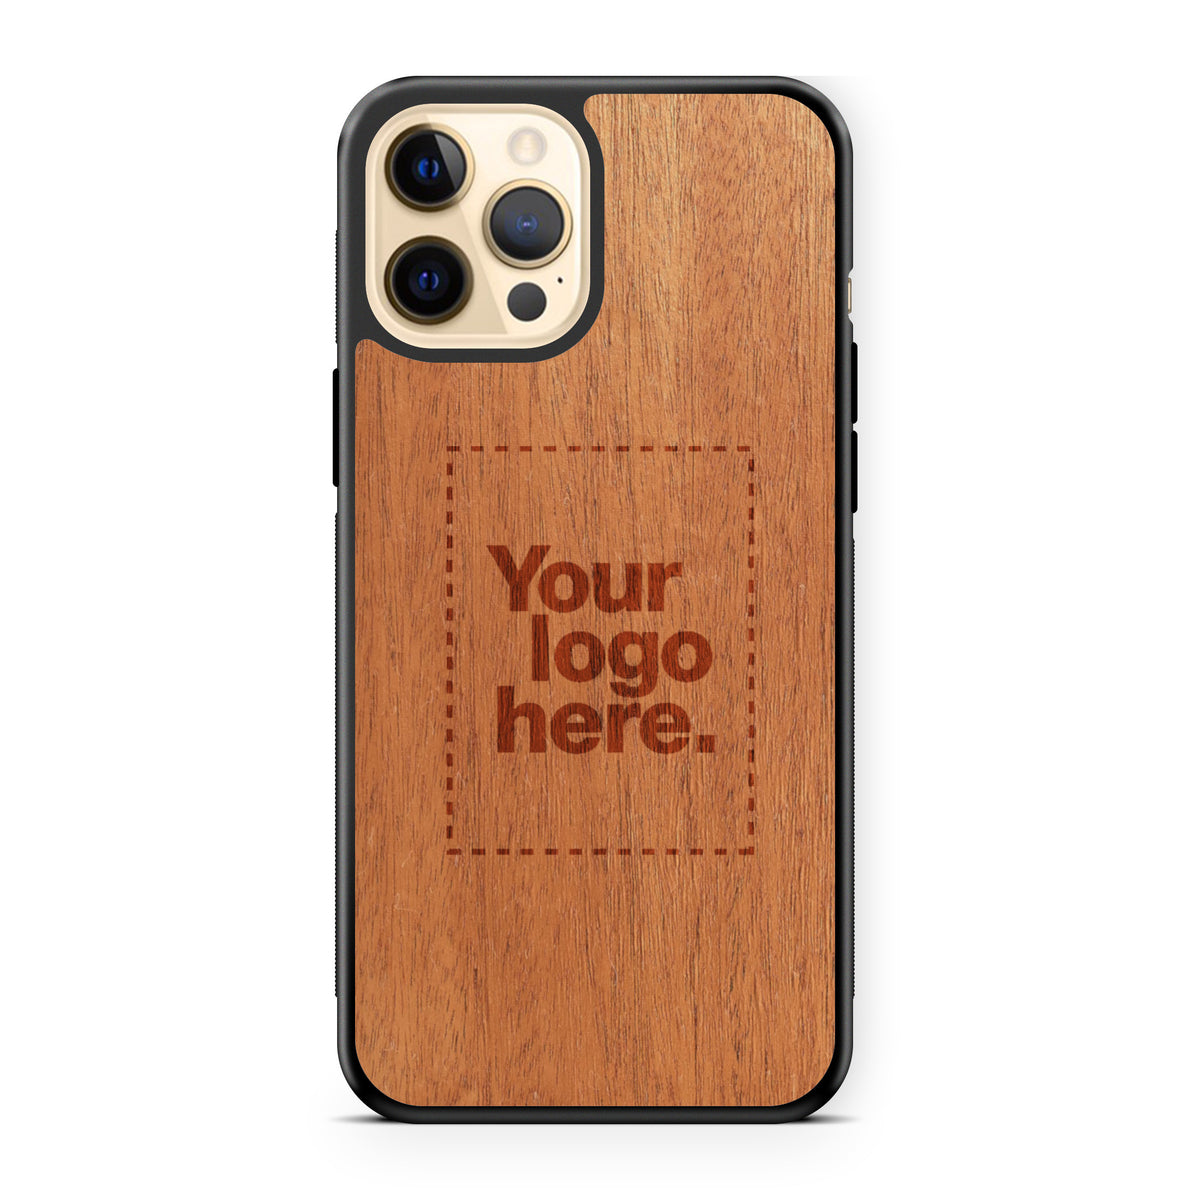 Custom carved burnt customized personalized laser engraved wooden Apple iPhone 12 Pro Max